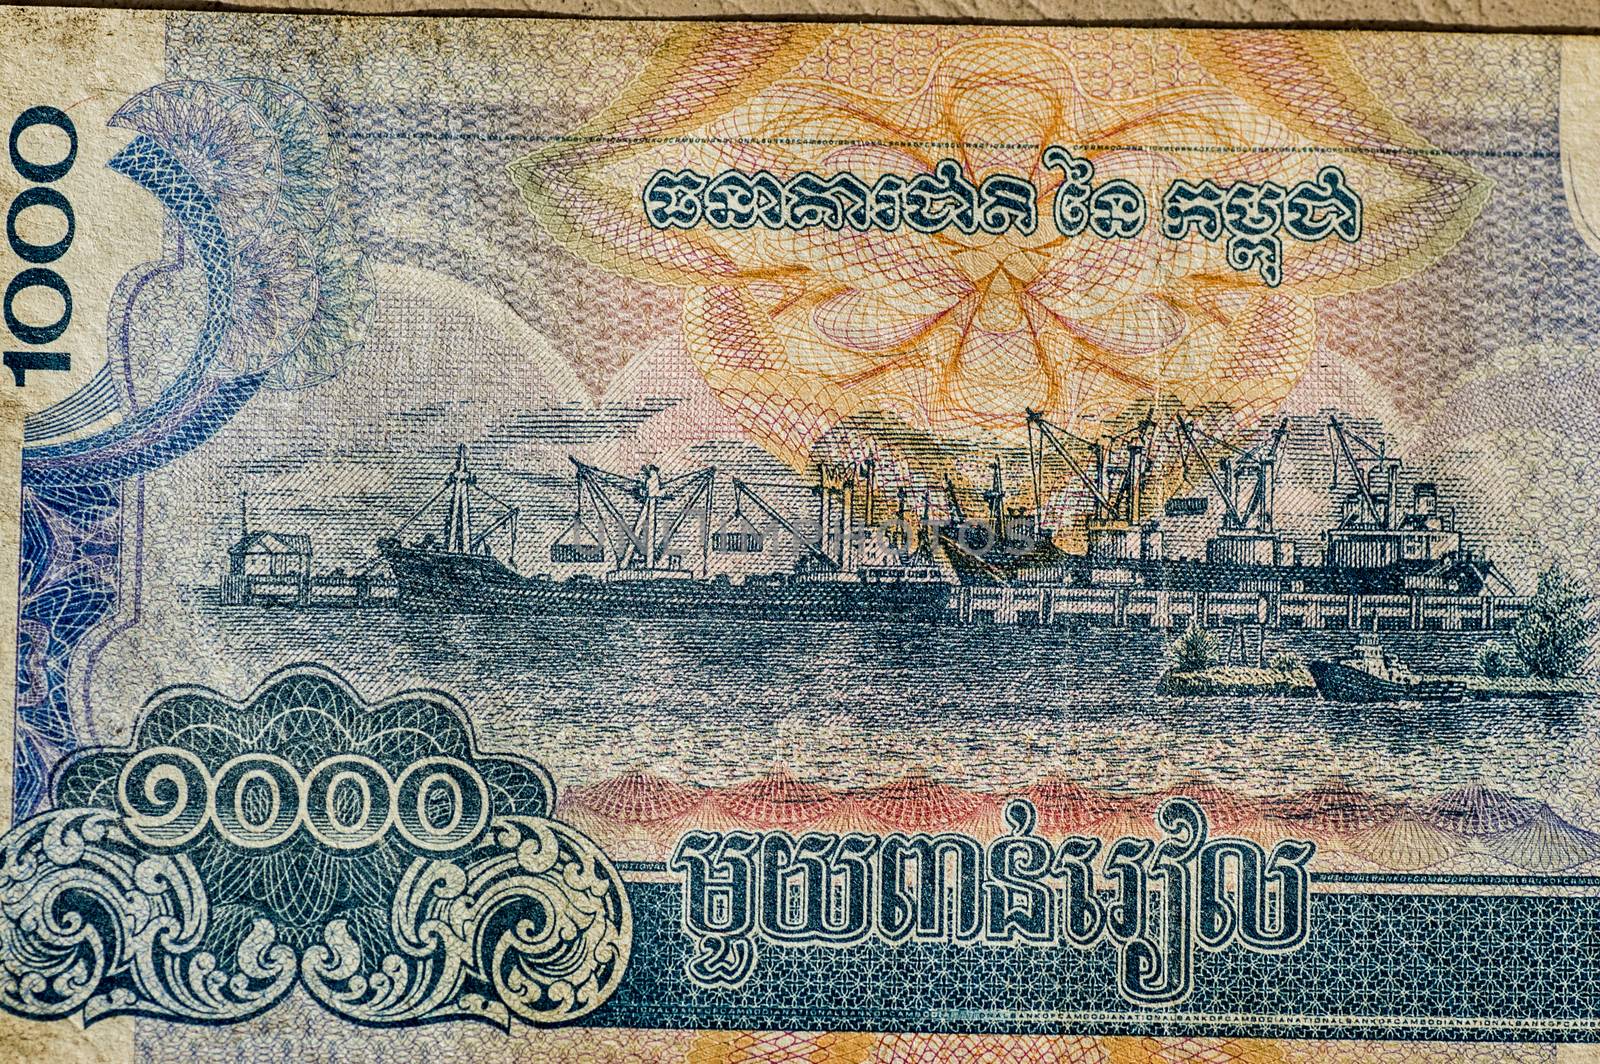 Port of Sihanoukville banknote, Cambodia by BasPhoto